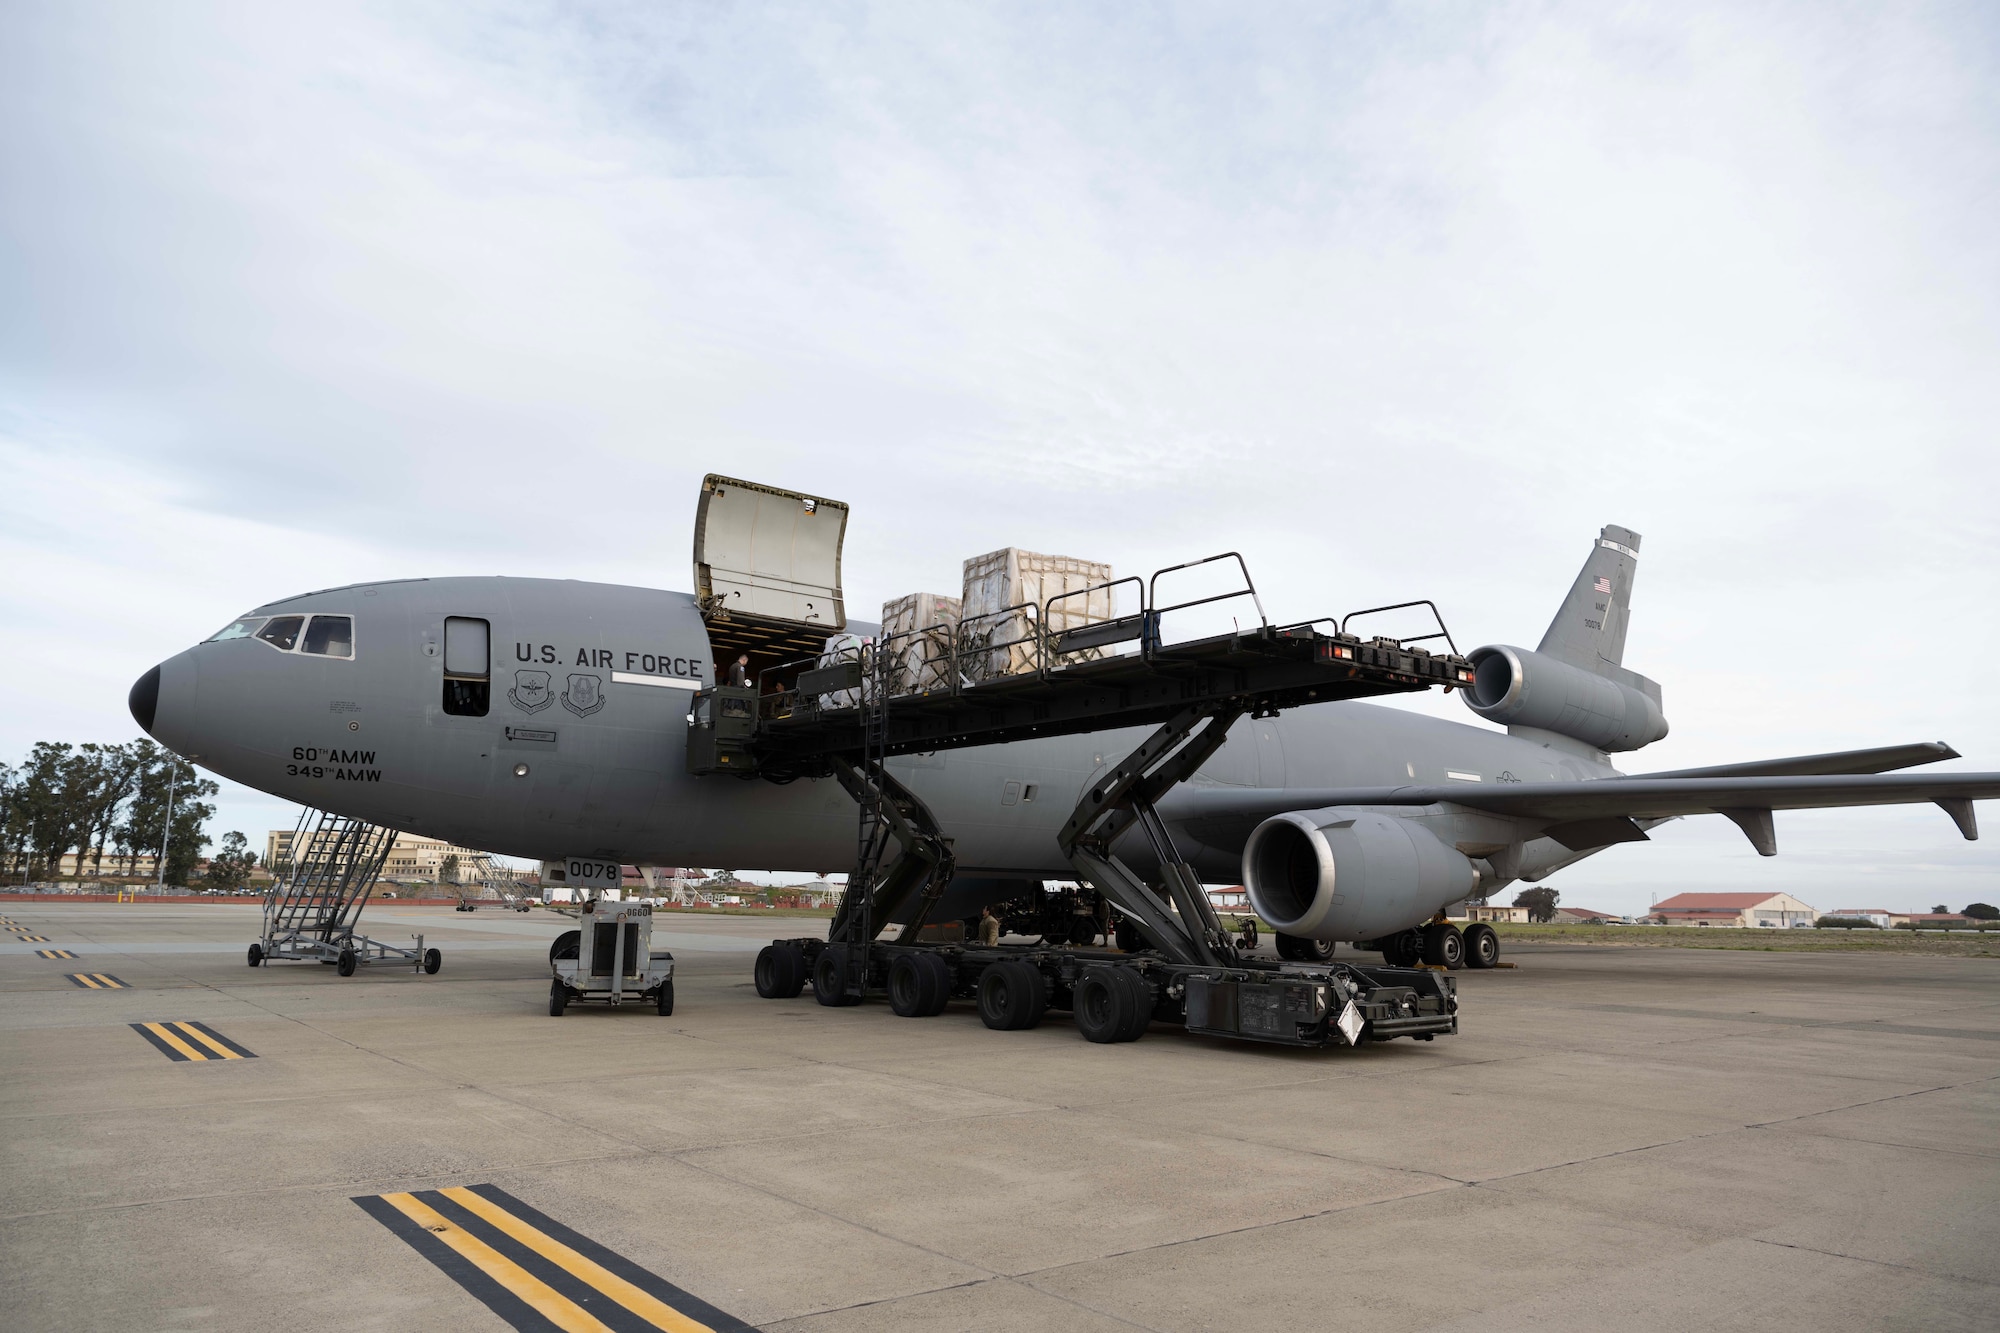 A large vehicle carrying cargo moves towards a big plane